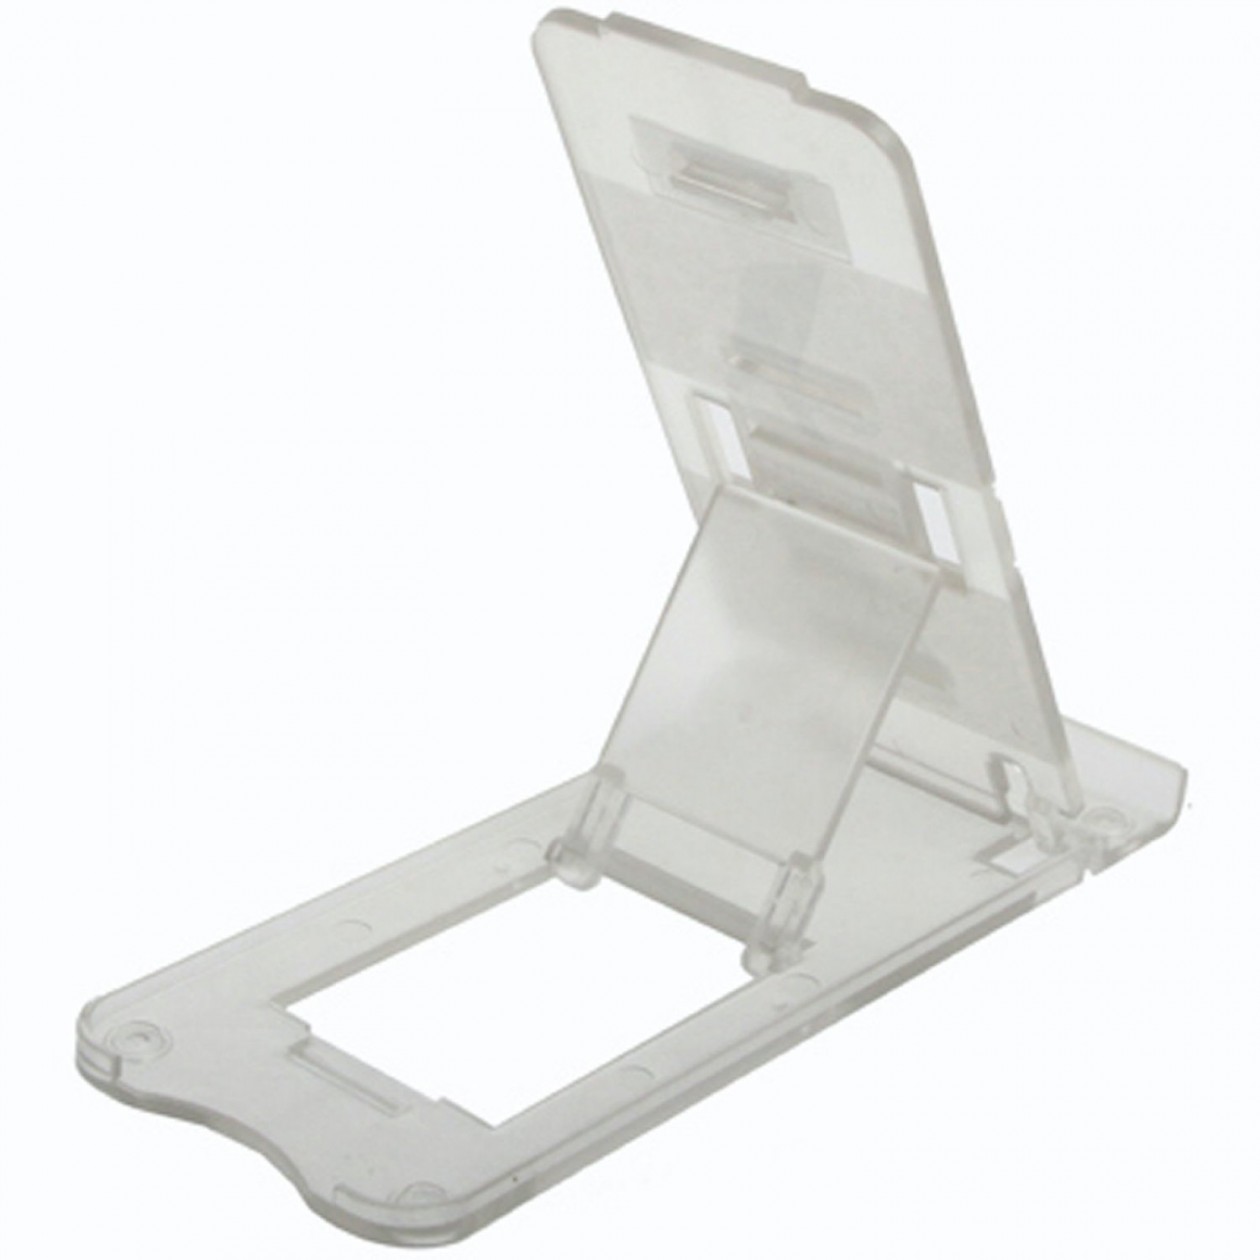 Folding Plastic Desk Stand For Tablets and Mobile Phones